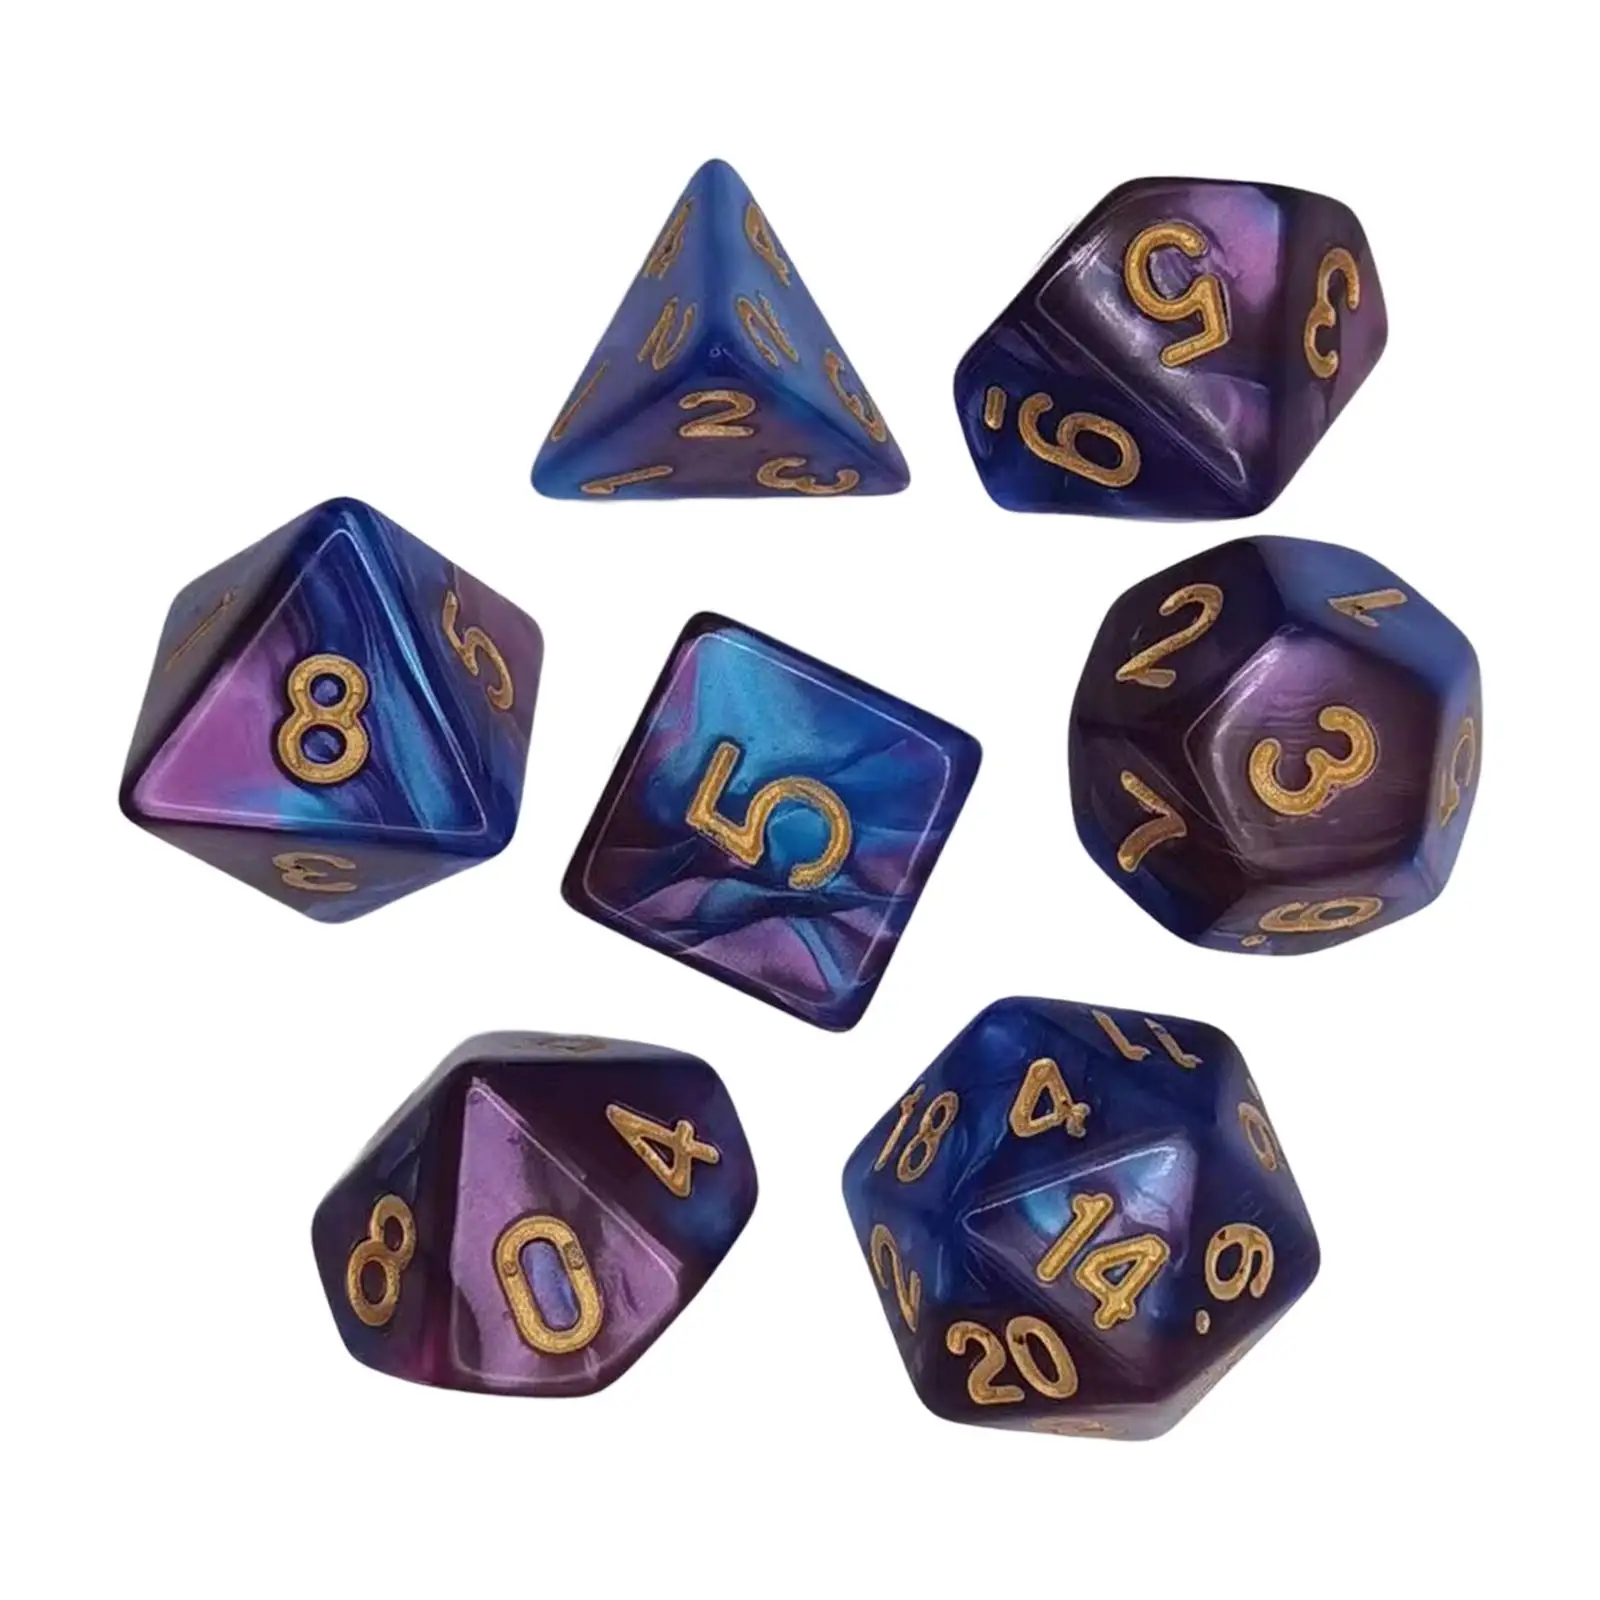 7x Colorful Polyhedral Dices Gifts Smooth Surface Acrylic for RPG Table Board Games